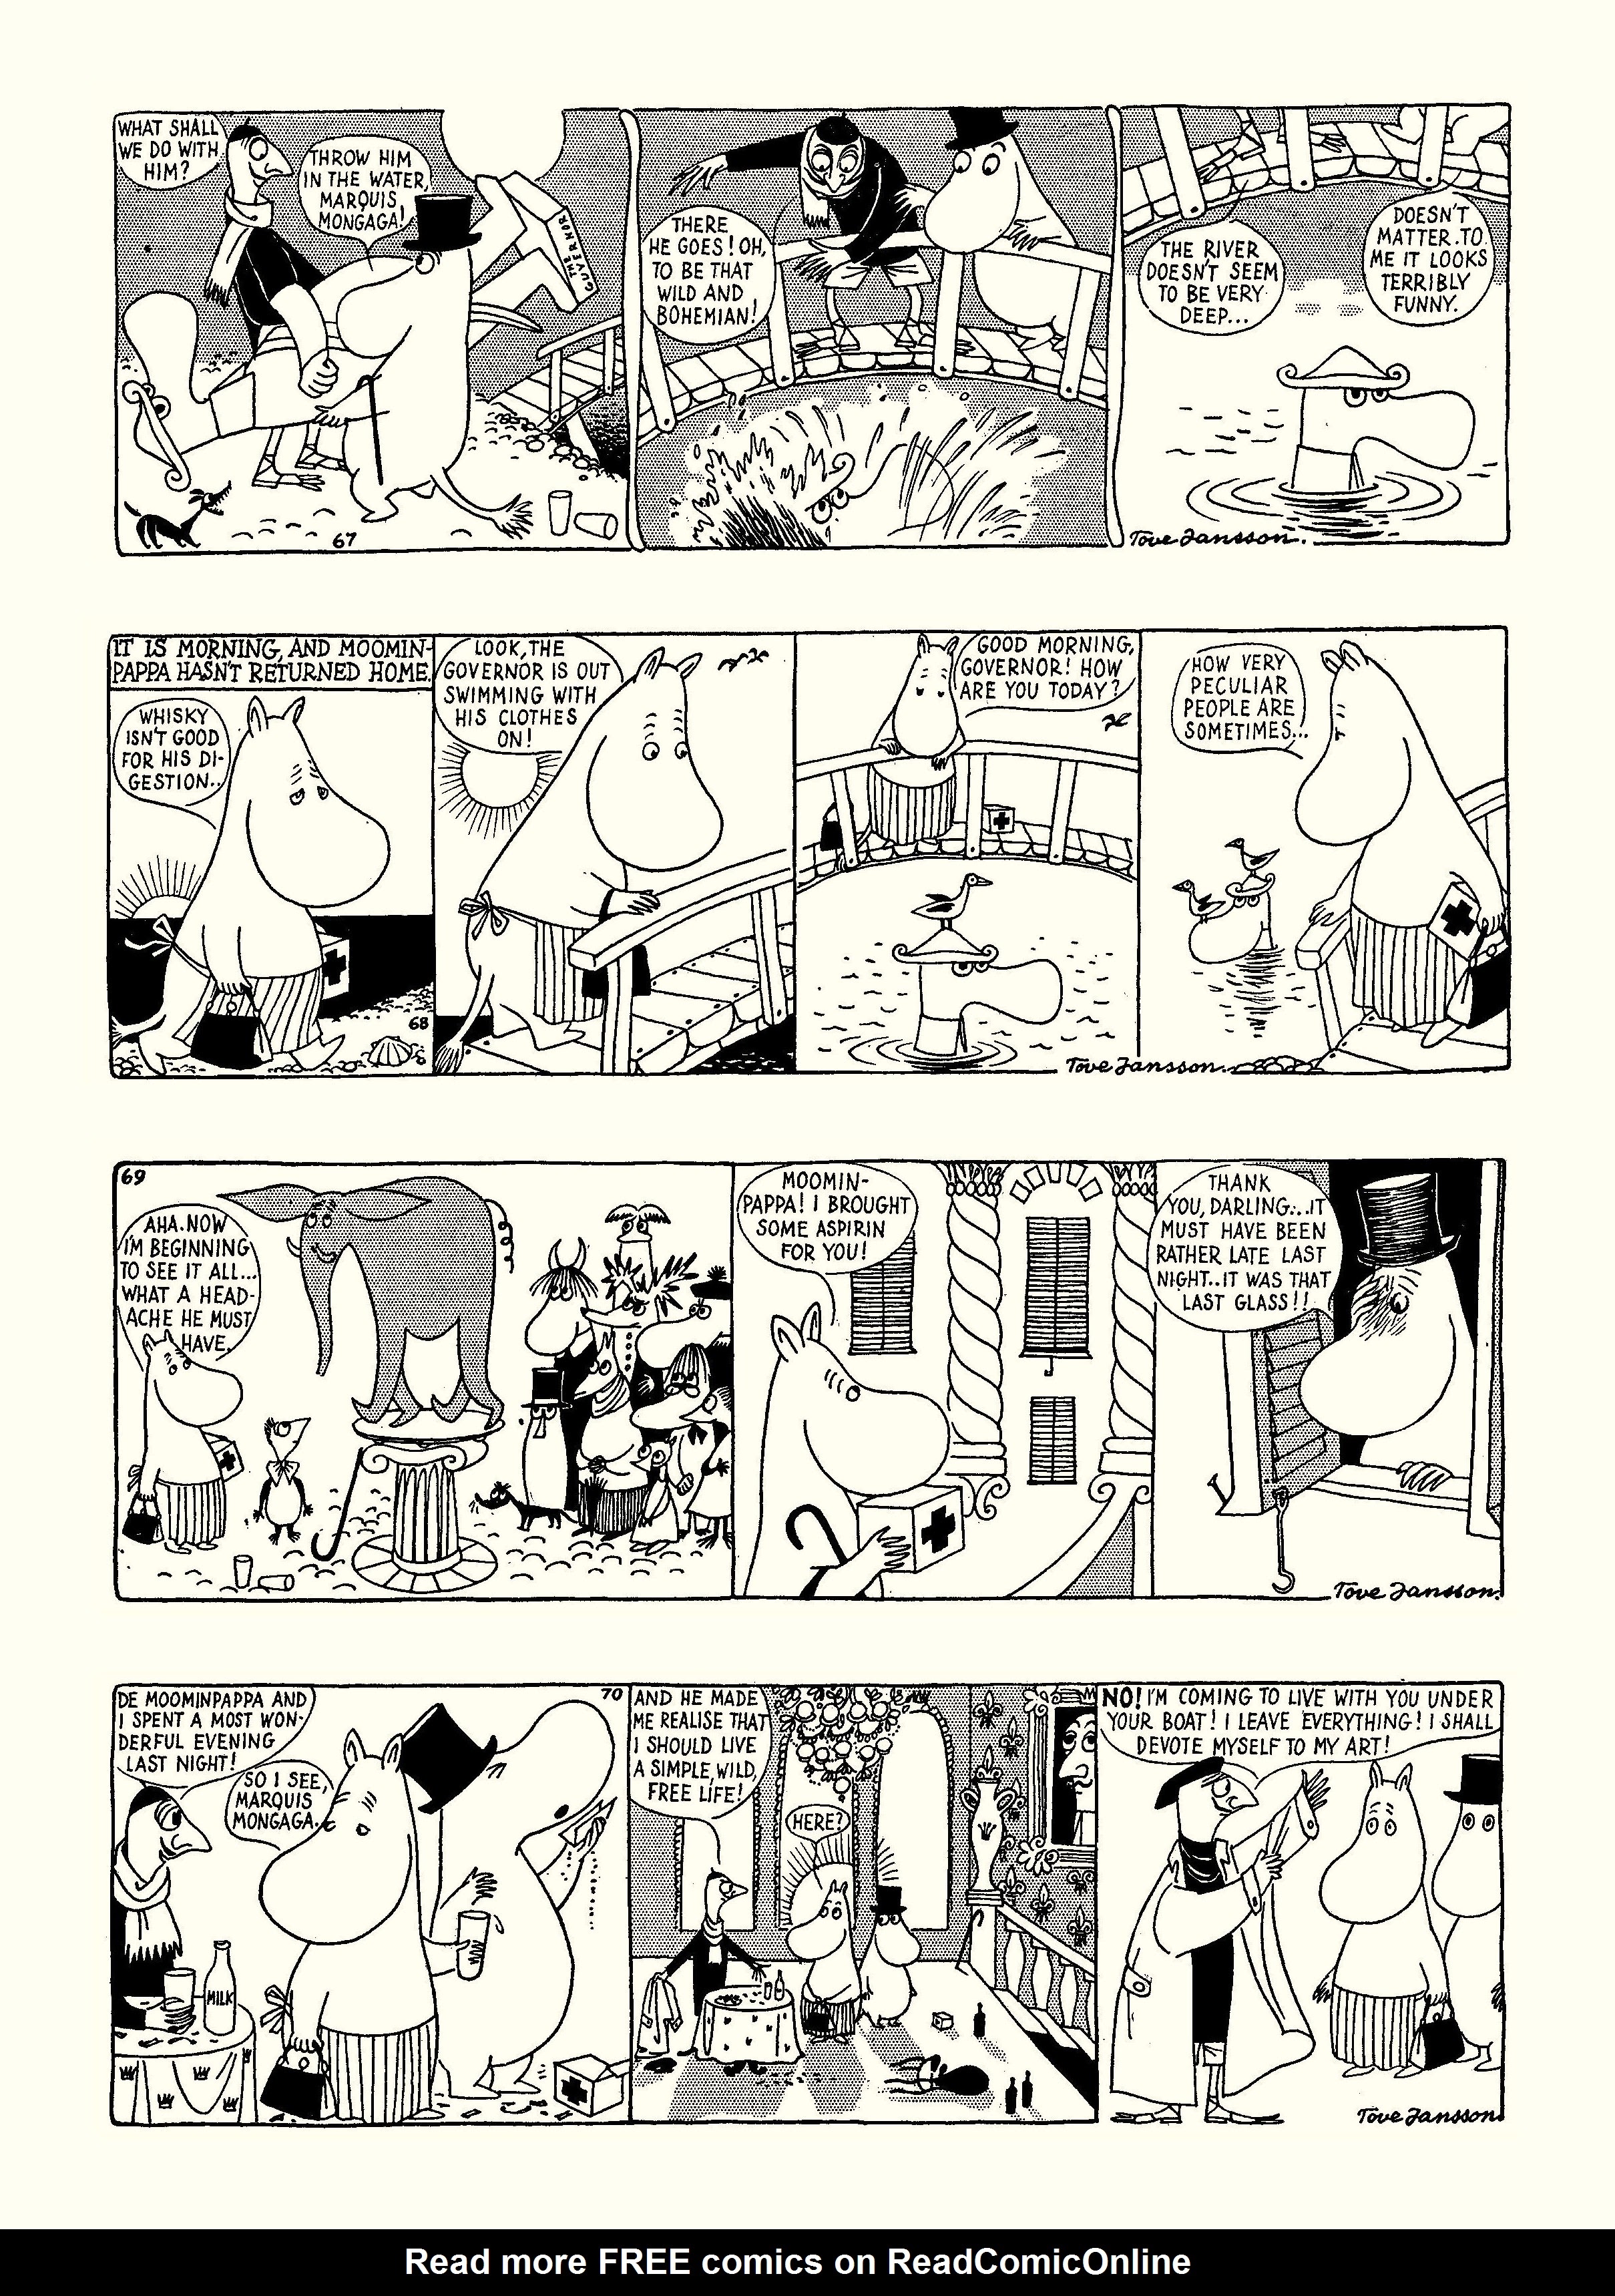 Read online Moomin: The Complete Tove Jansson Comic Strip comic -  Issue # TPB 1 - 65